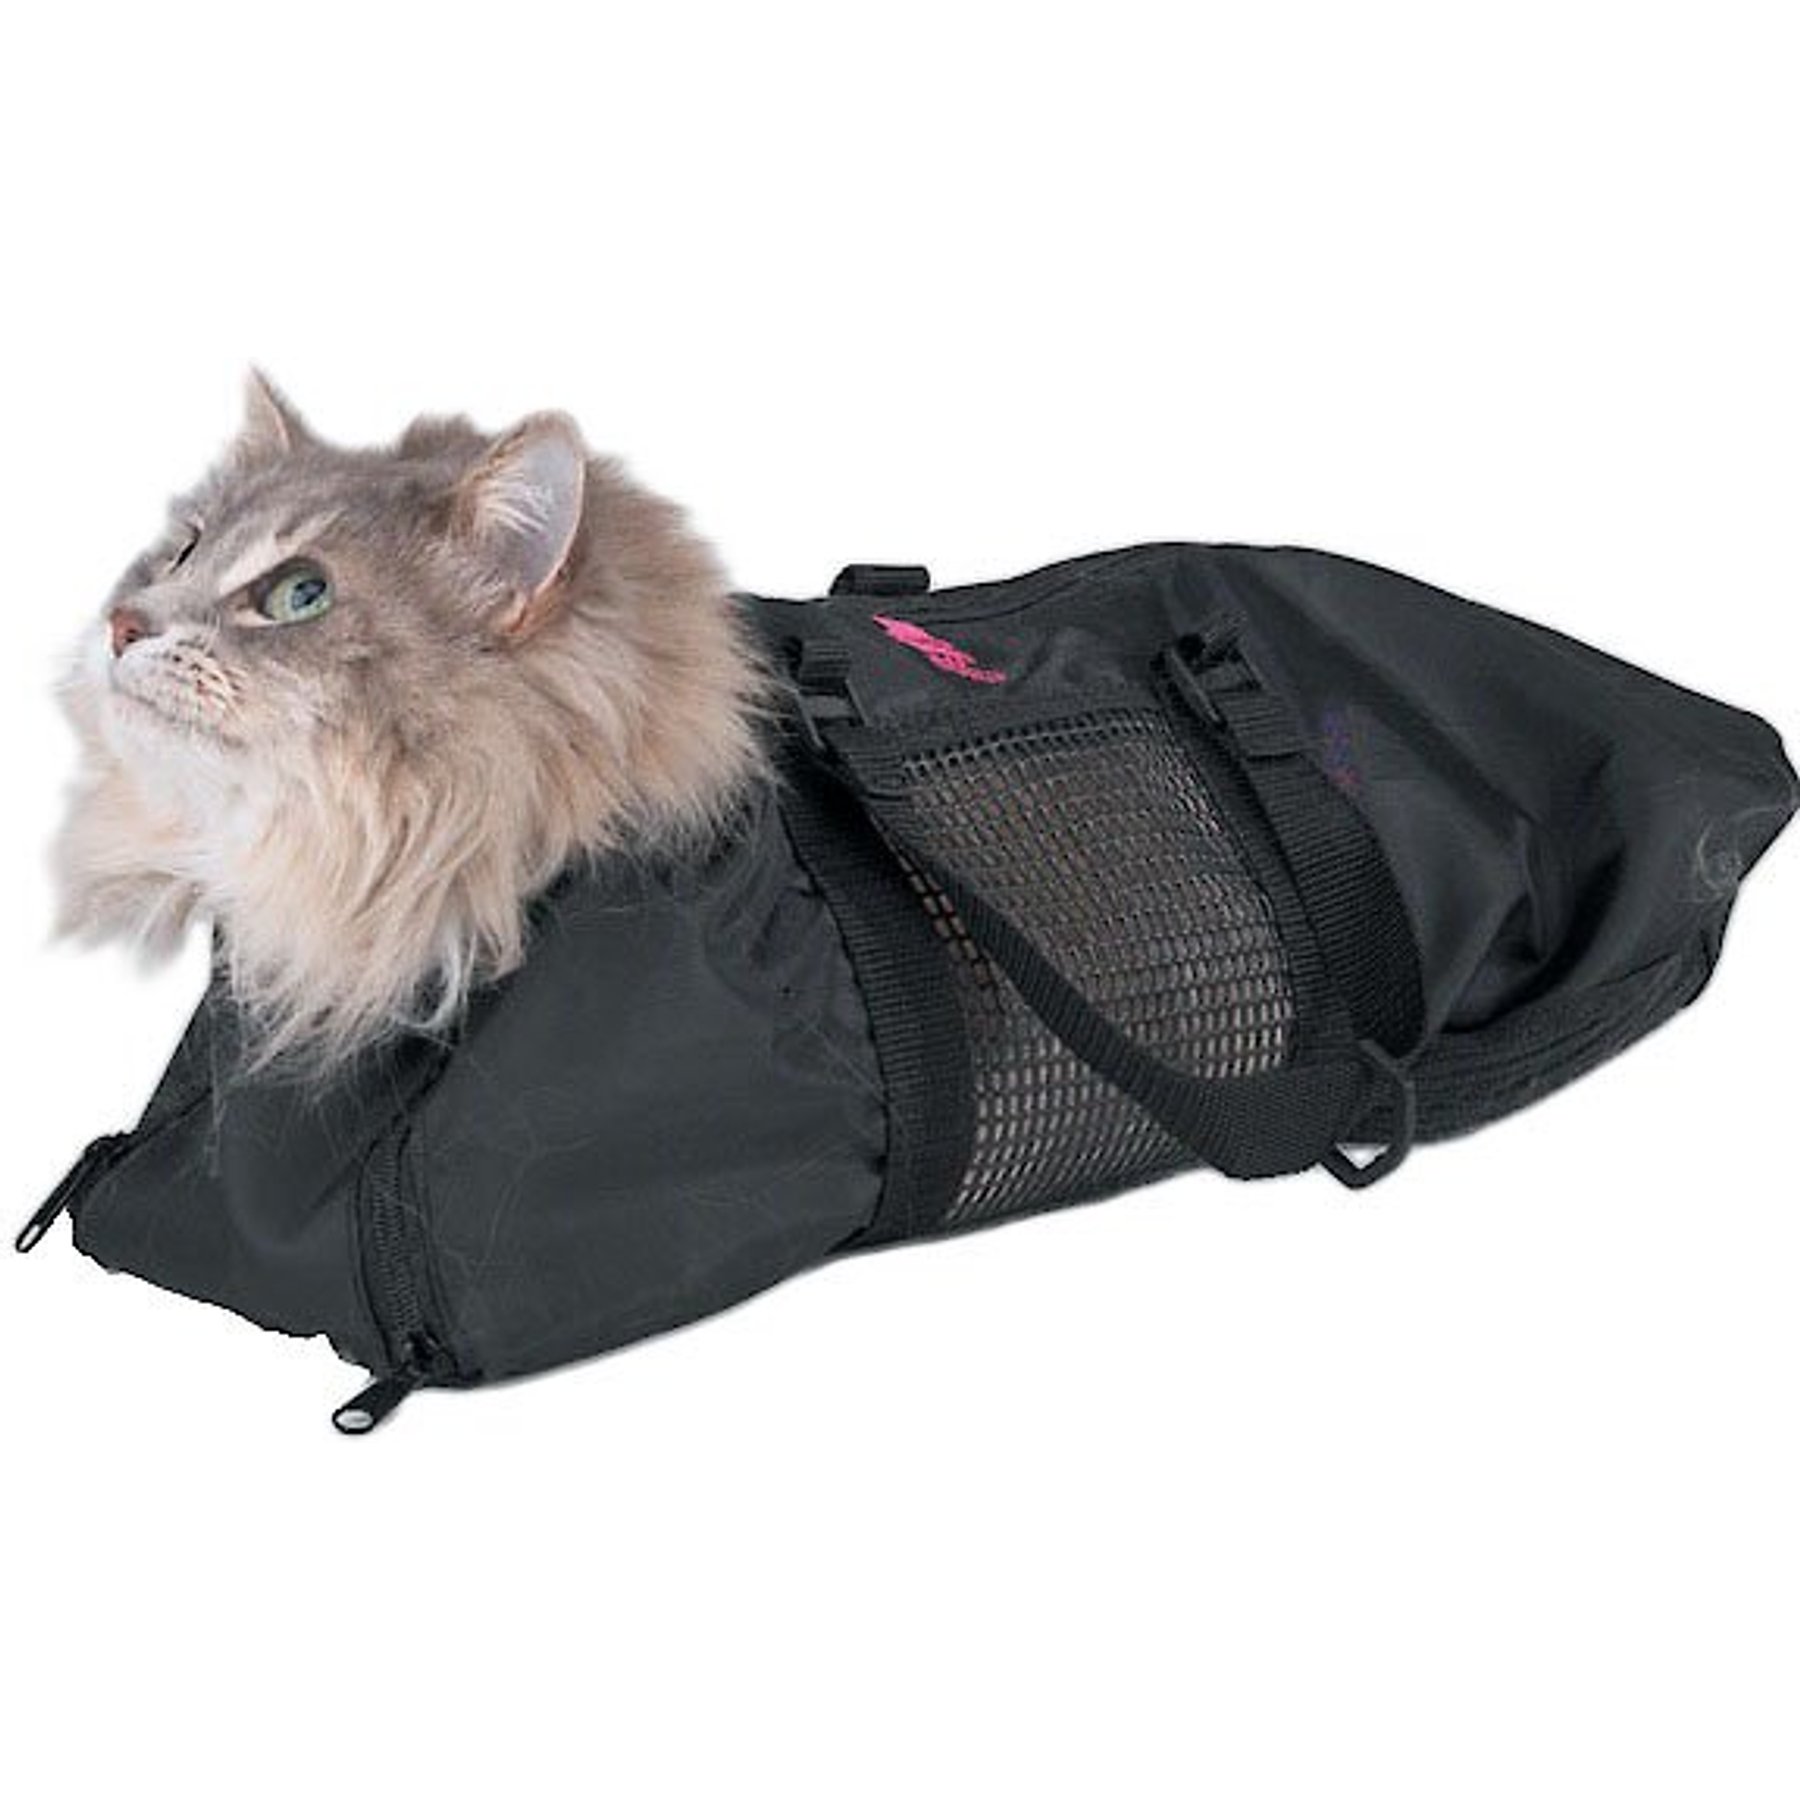 Cat-in-the-Bag Cozy Comfort Carrier - Small Red Cat Carrier Bag and Cat  Restraint Bag for Grooming, Vet Visits, Medication Administration, Dental